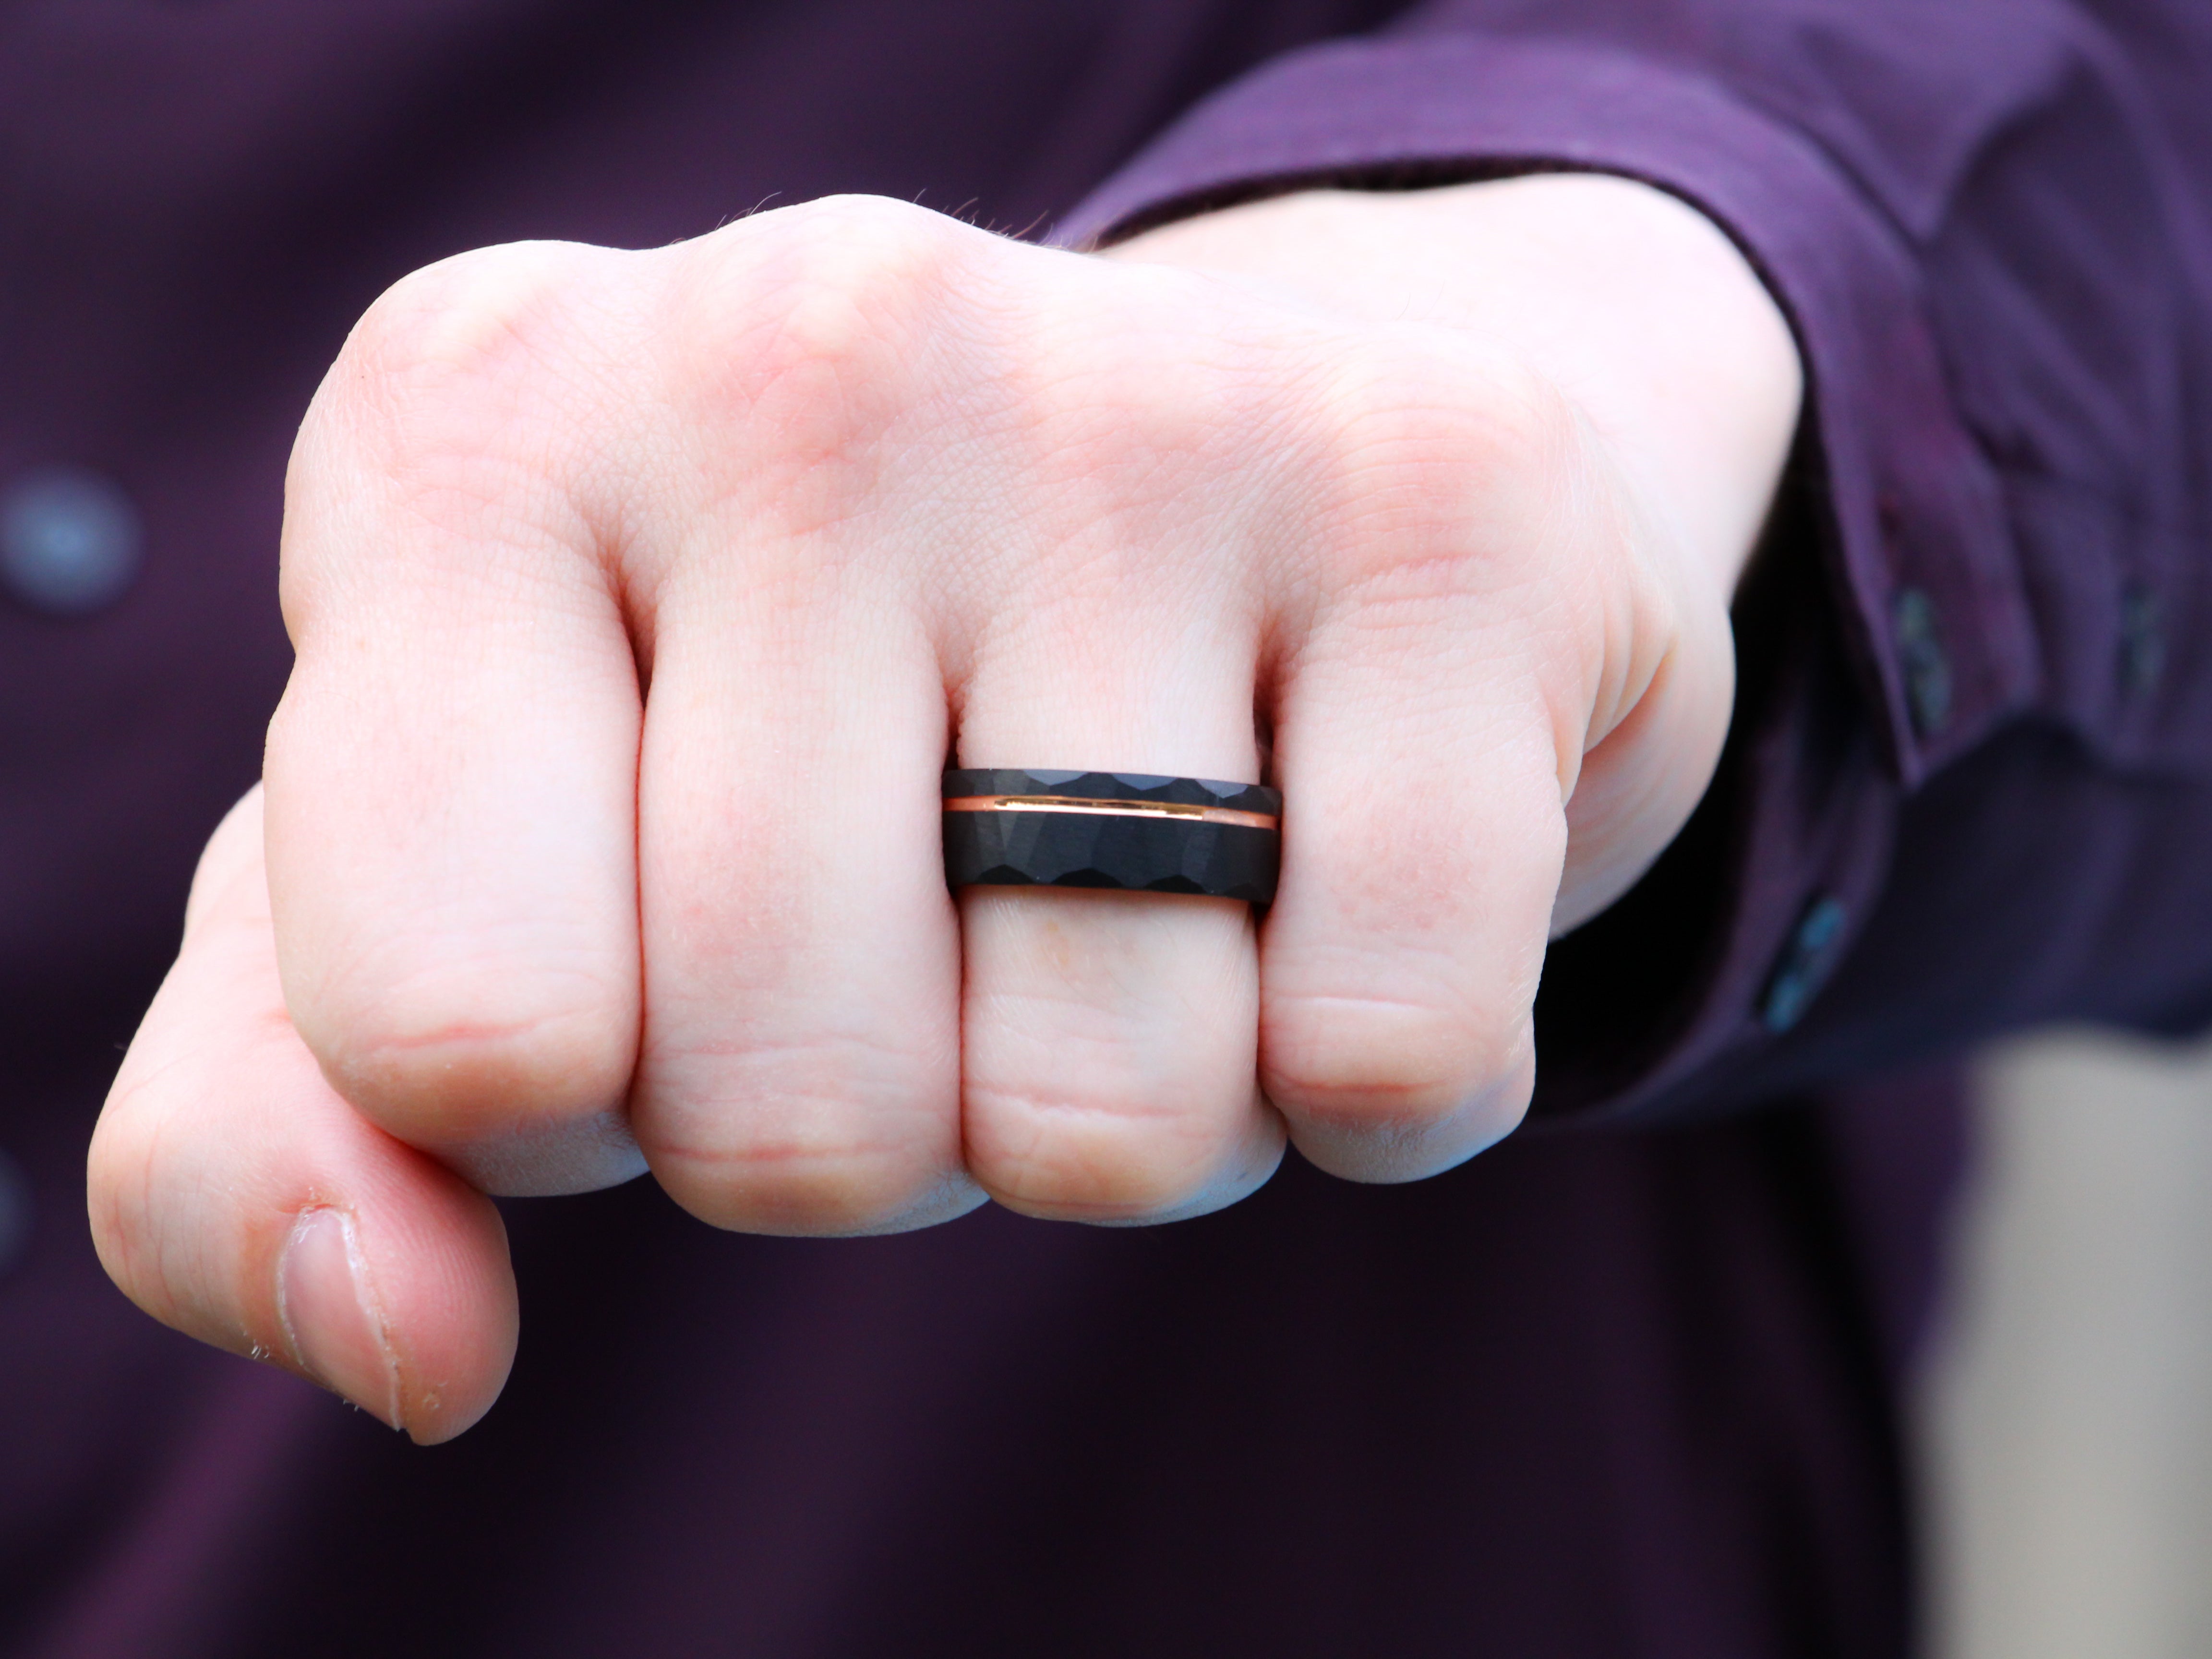 Black Hammered Tungsten Band with a Rose Gold Strip worn as a Men's Wedding Ring